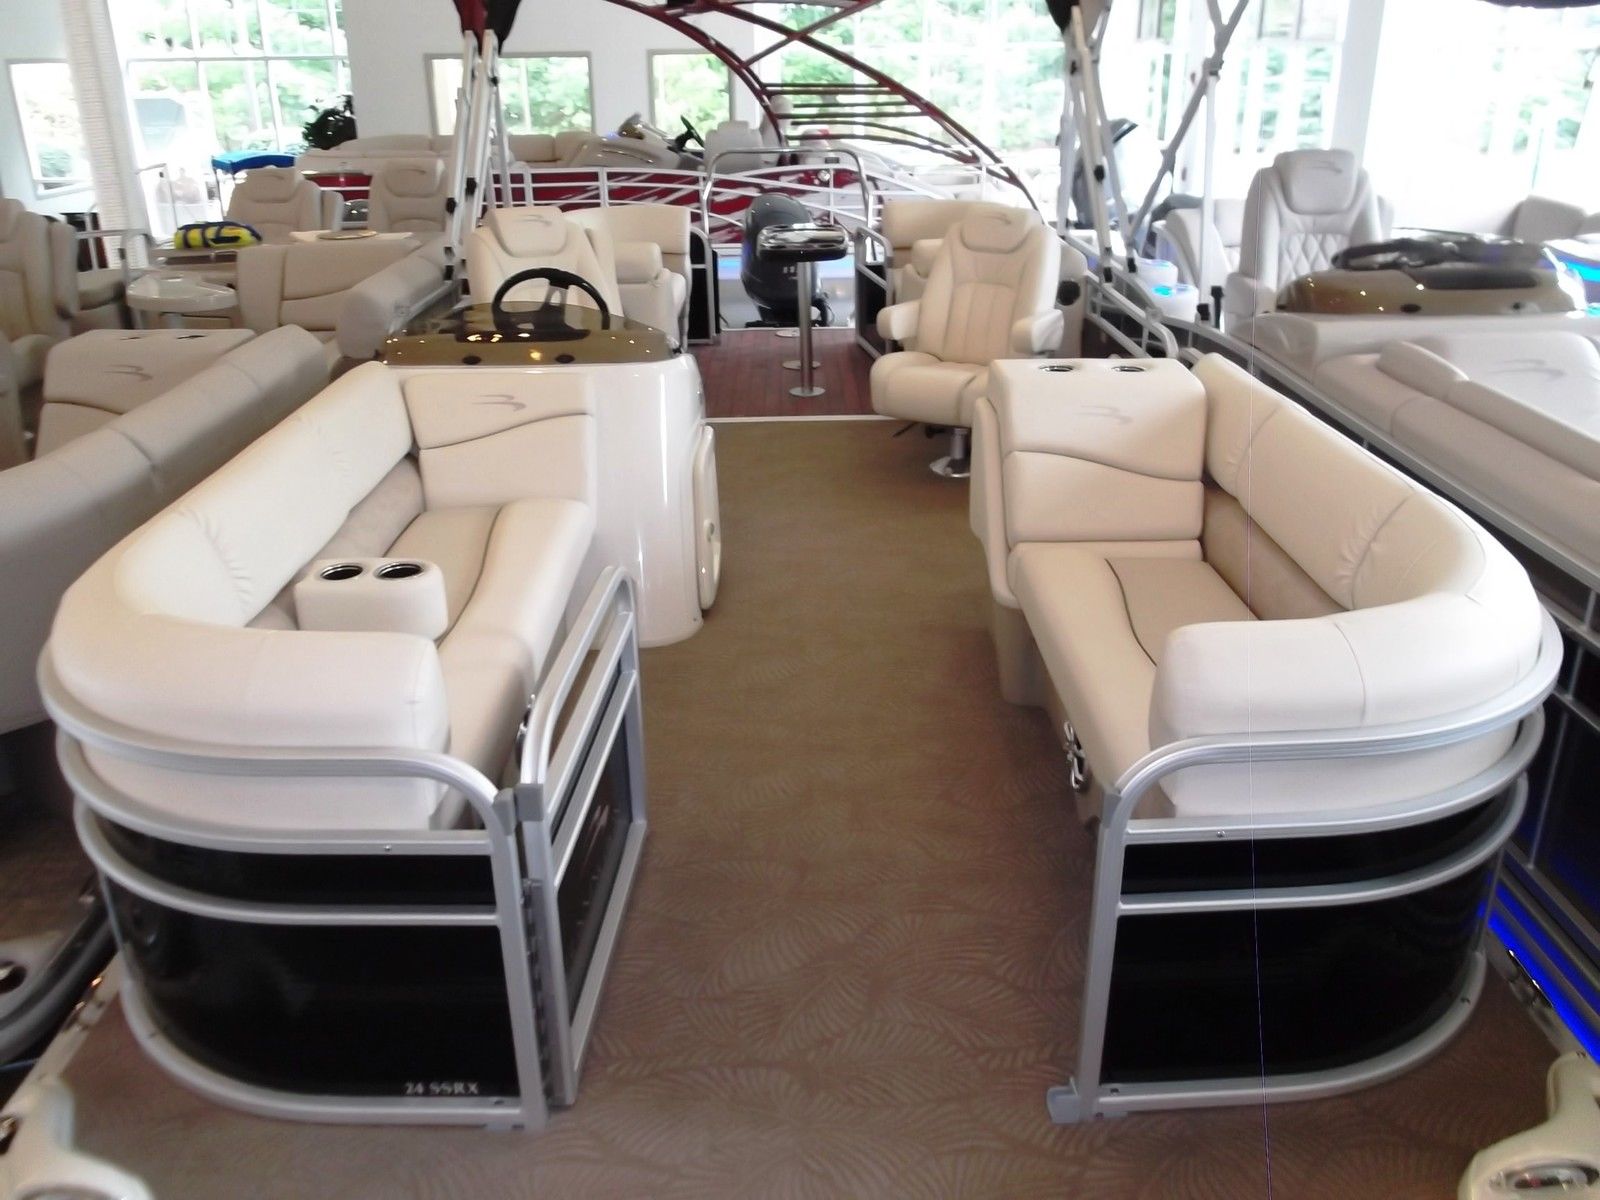 Bennington 24 SSRX 2014 for sale for $33,995 - Boats-from ...